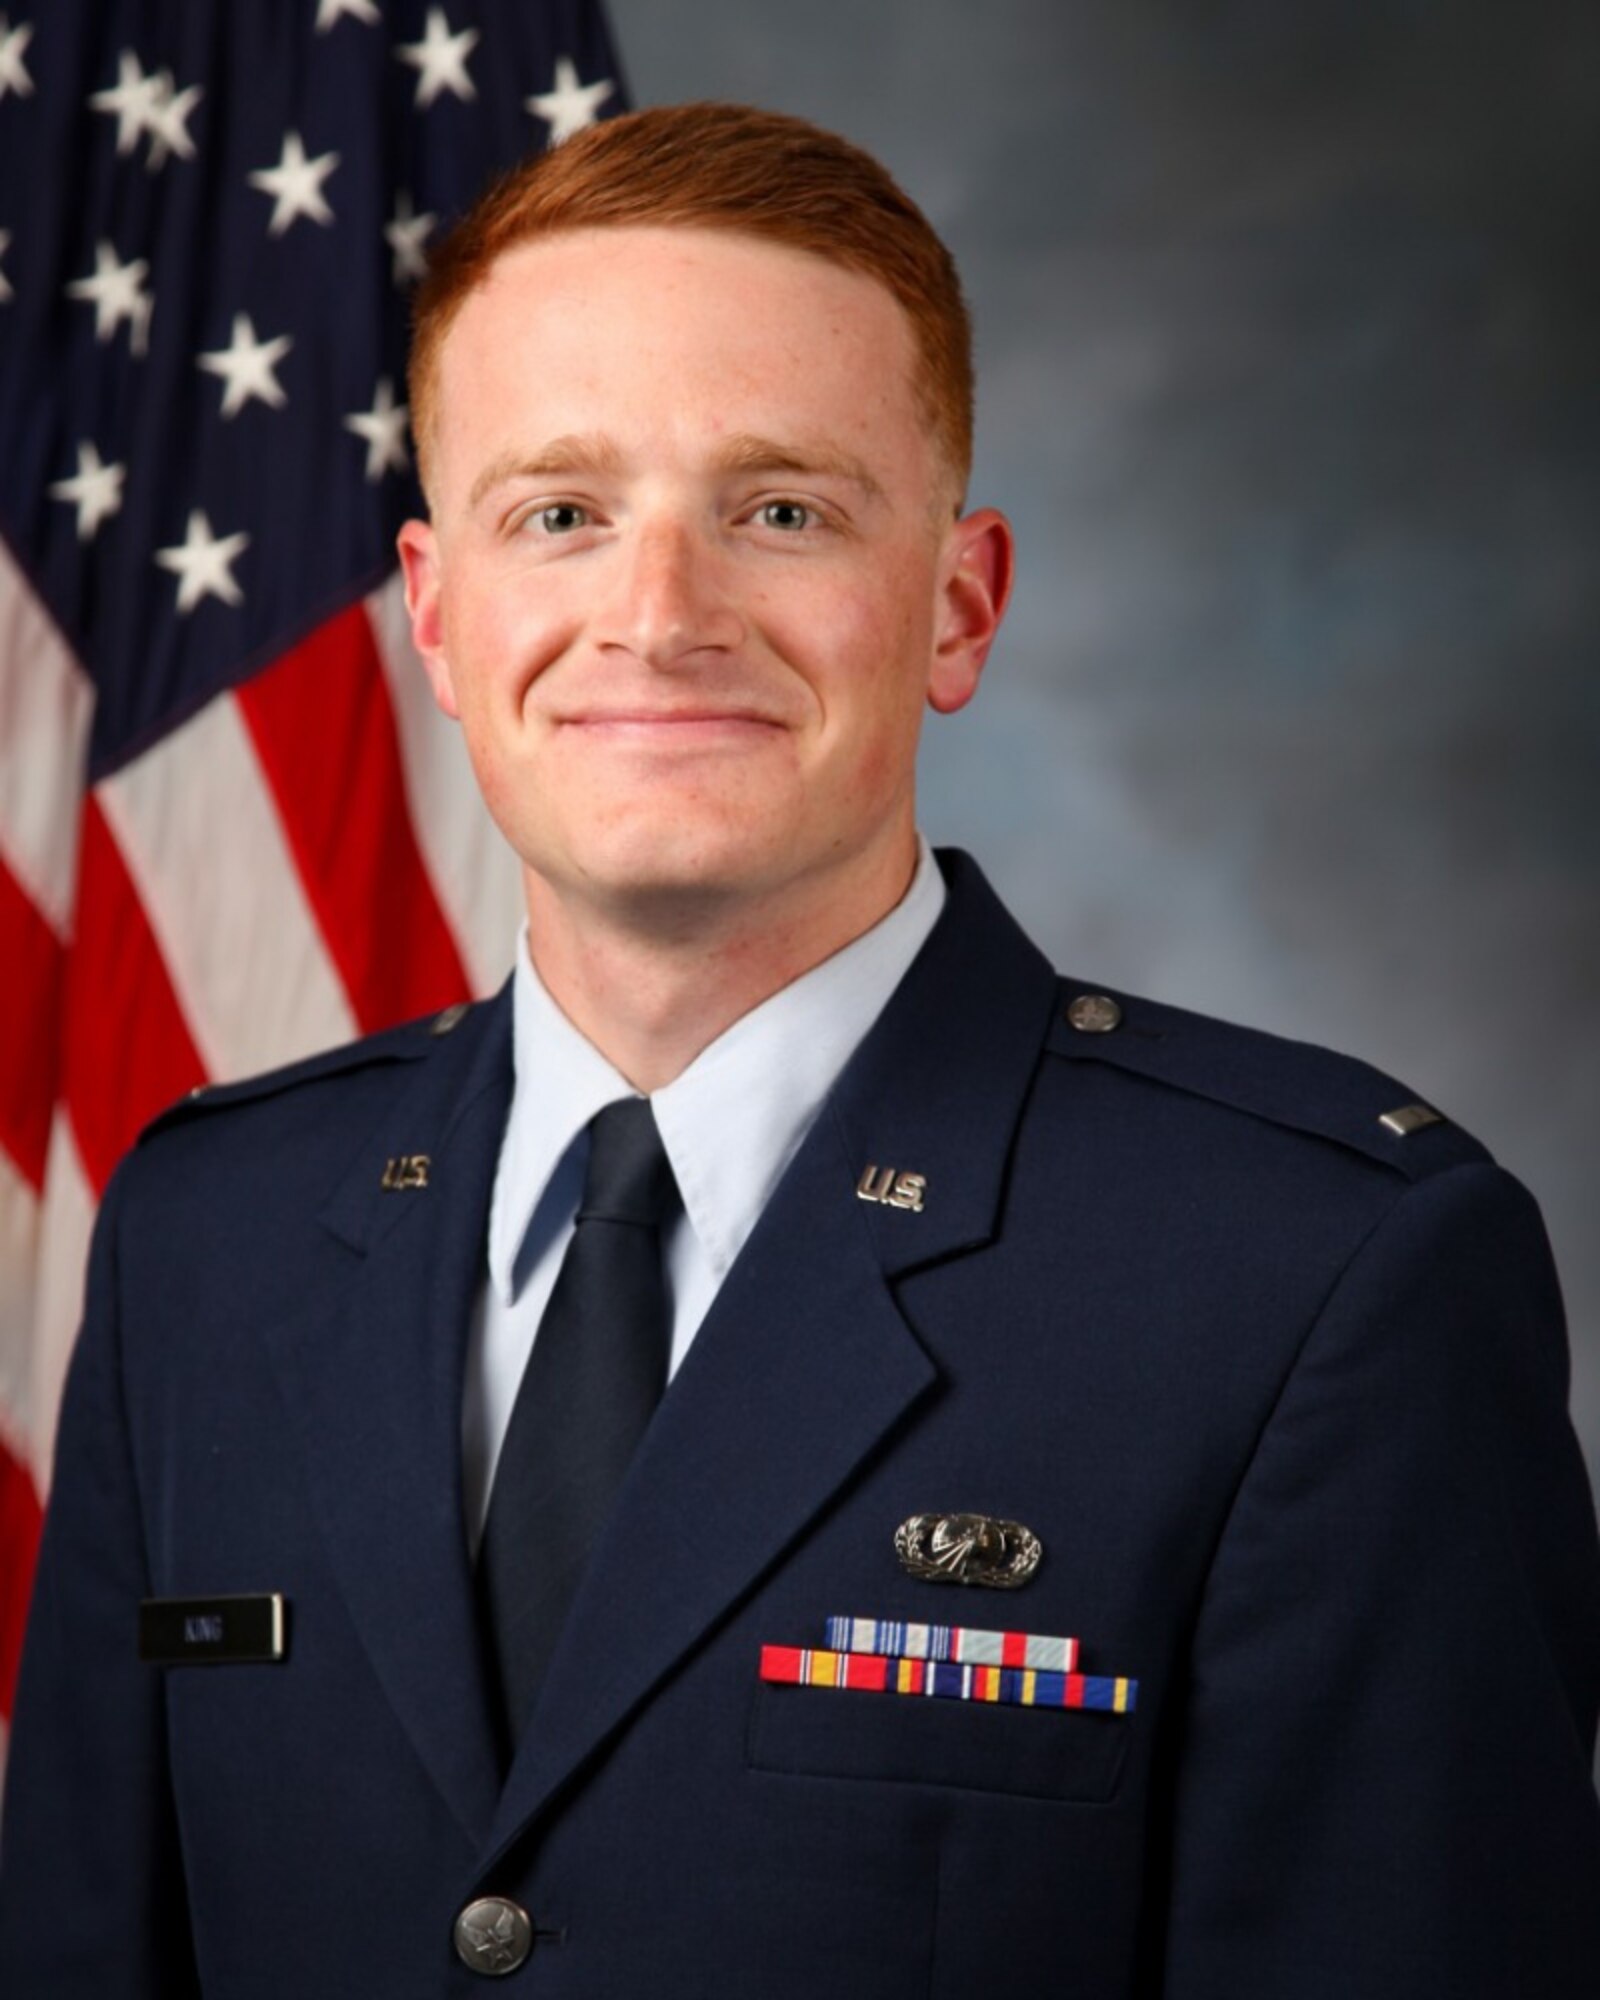 Portrait of Air Force officer.